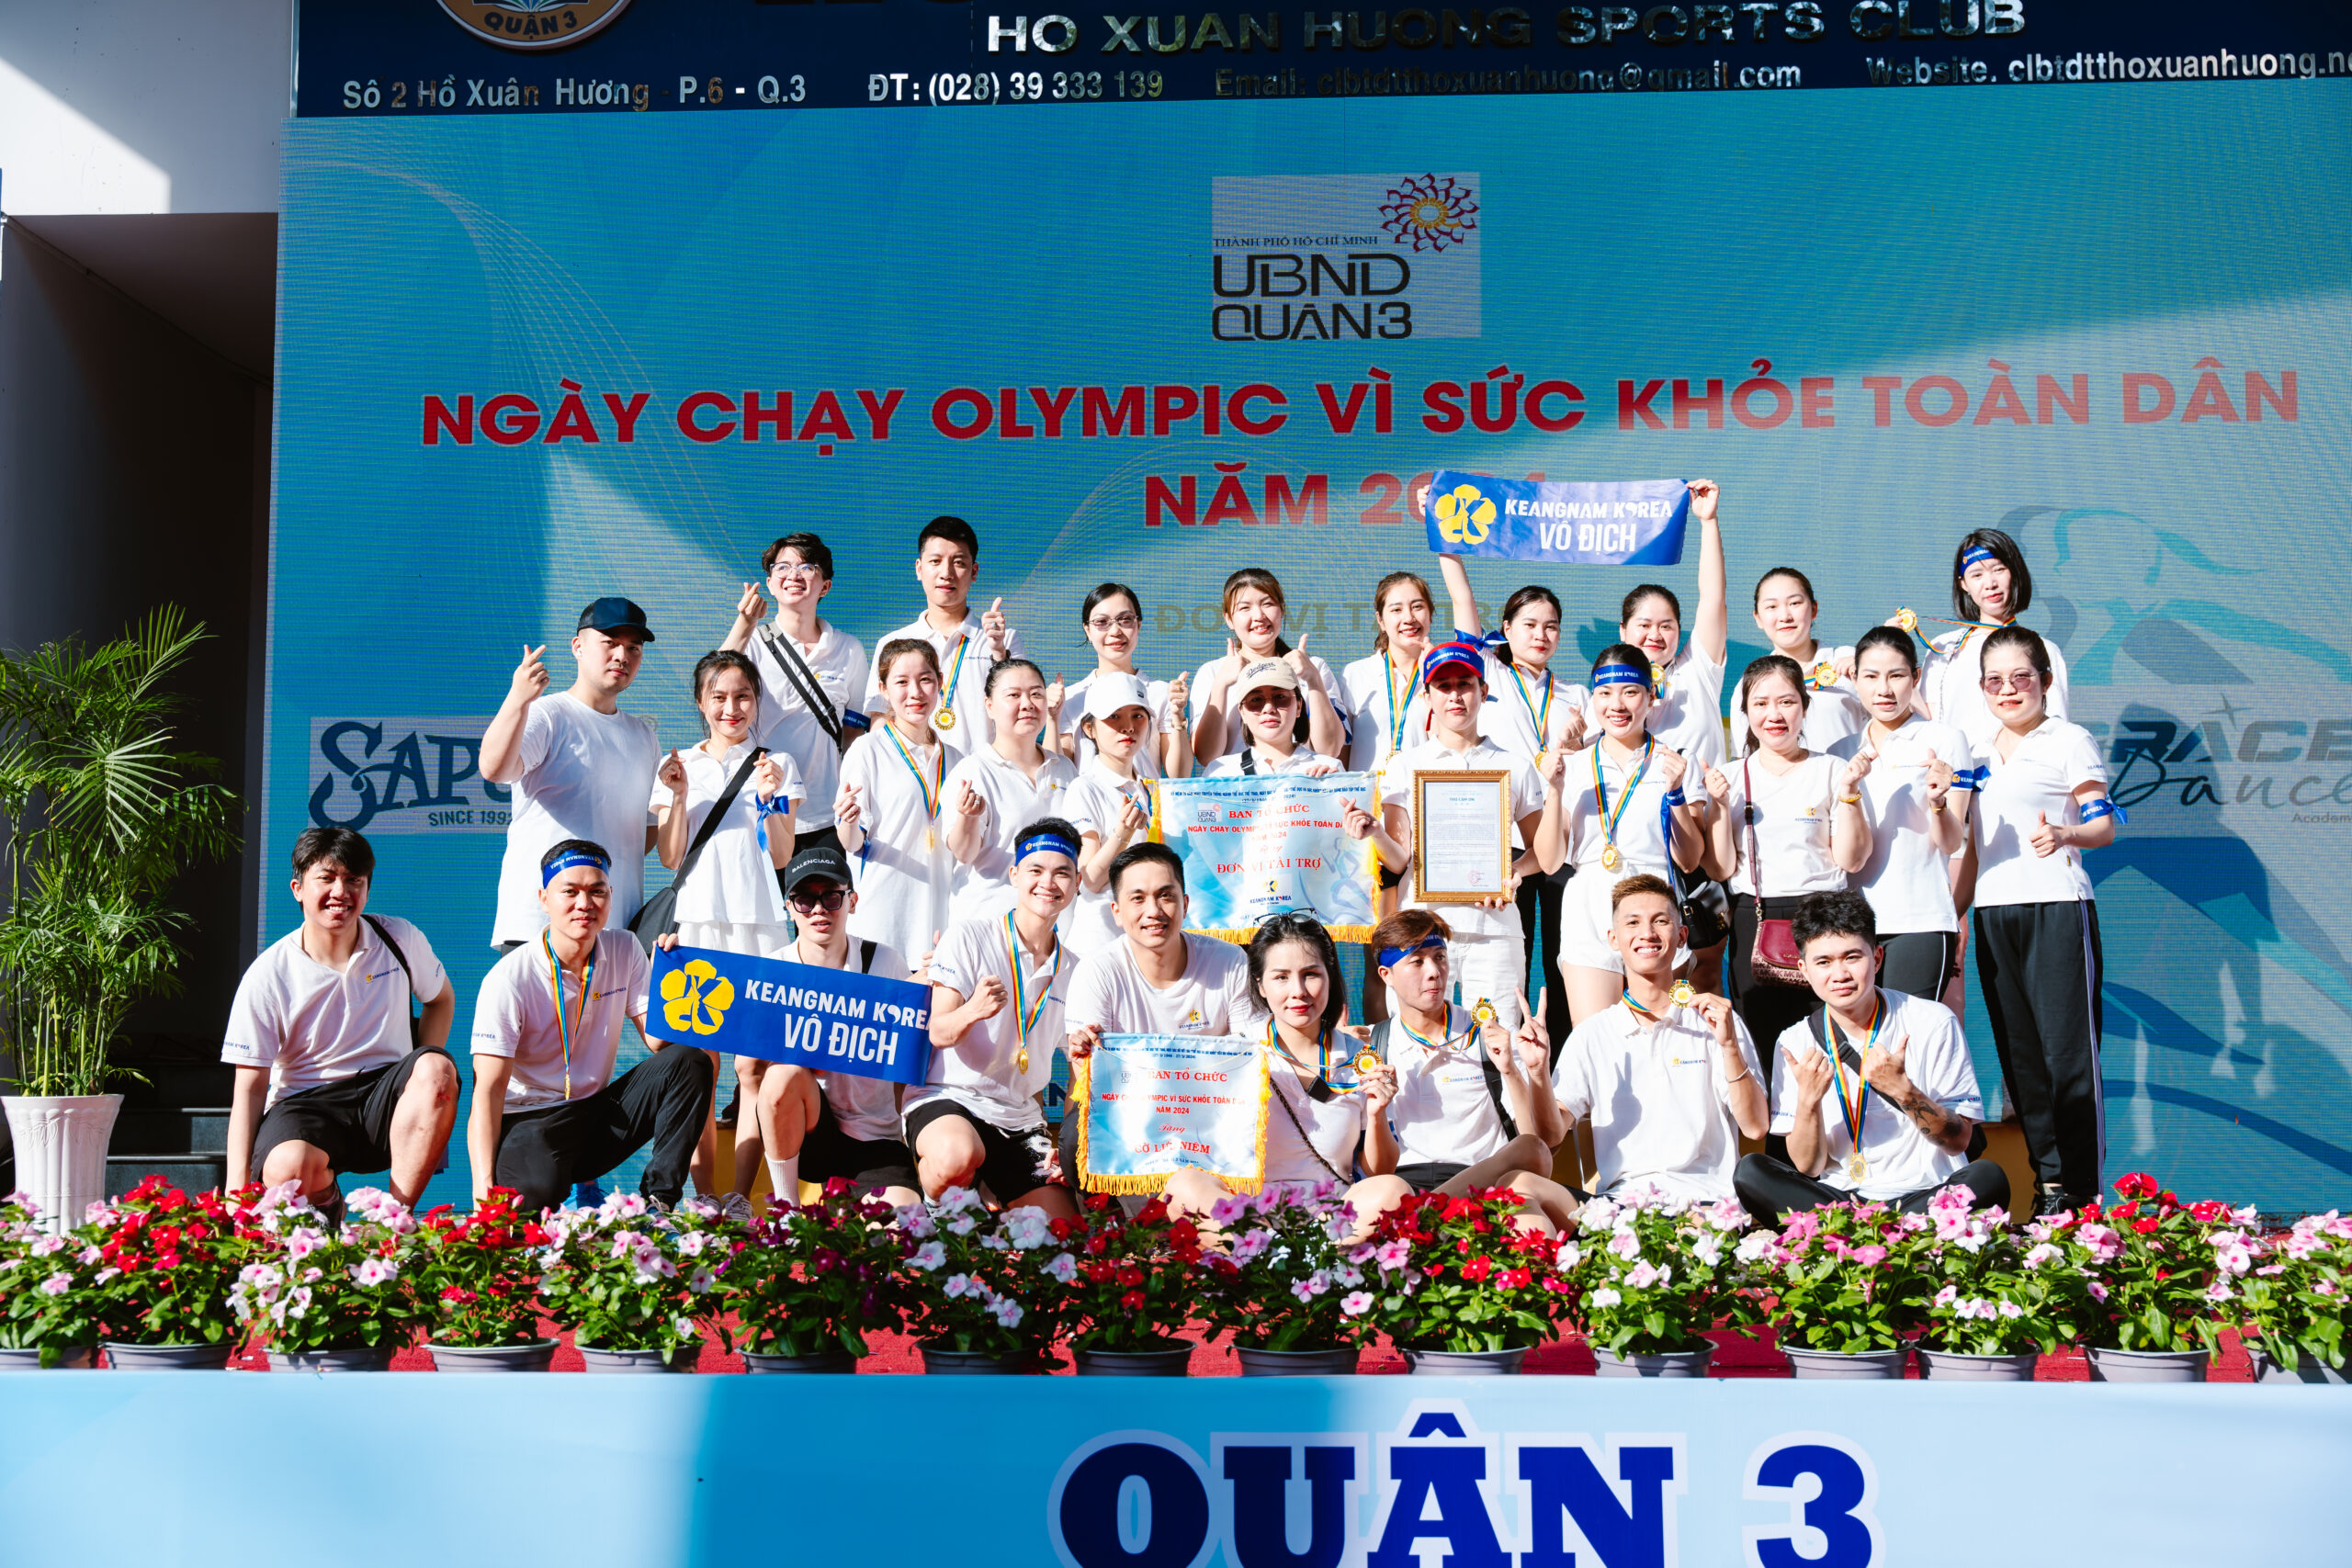 Keangnam Korea participates in Olympic running day for all people's health 2024